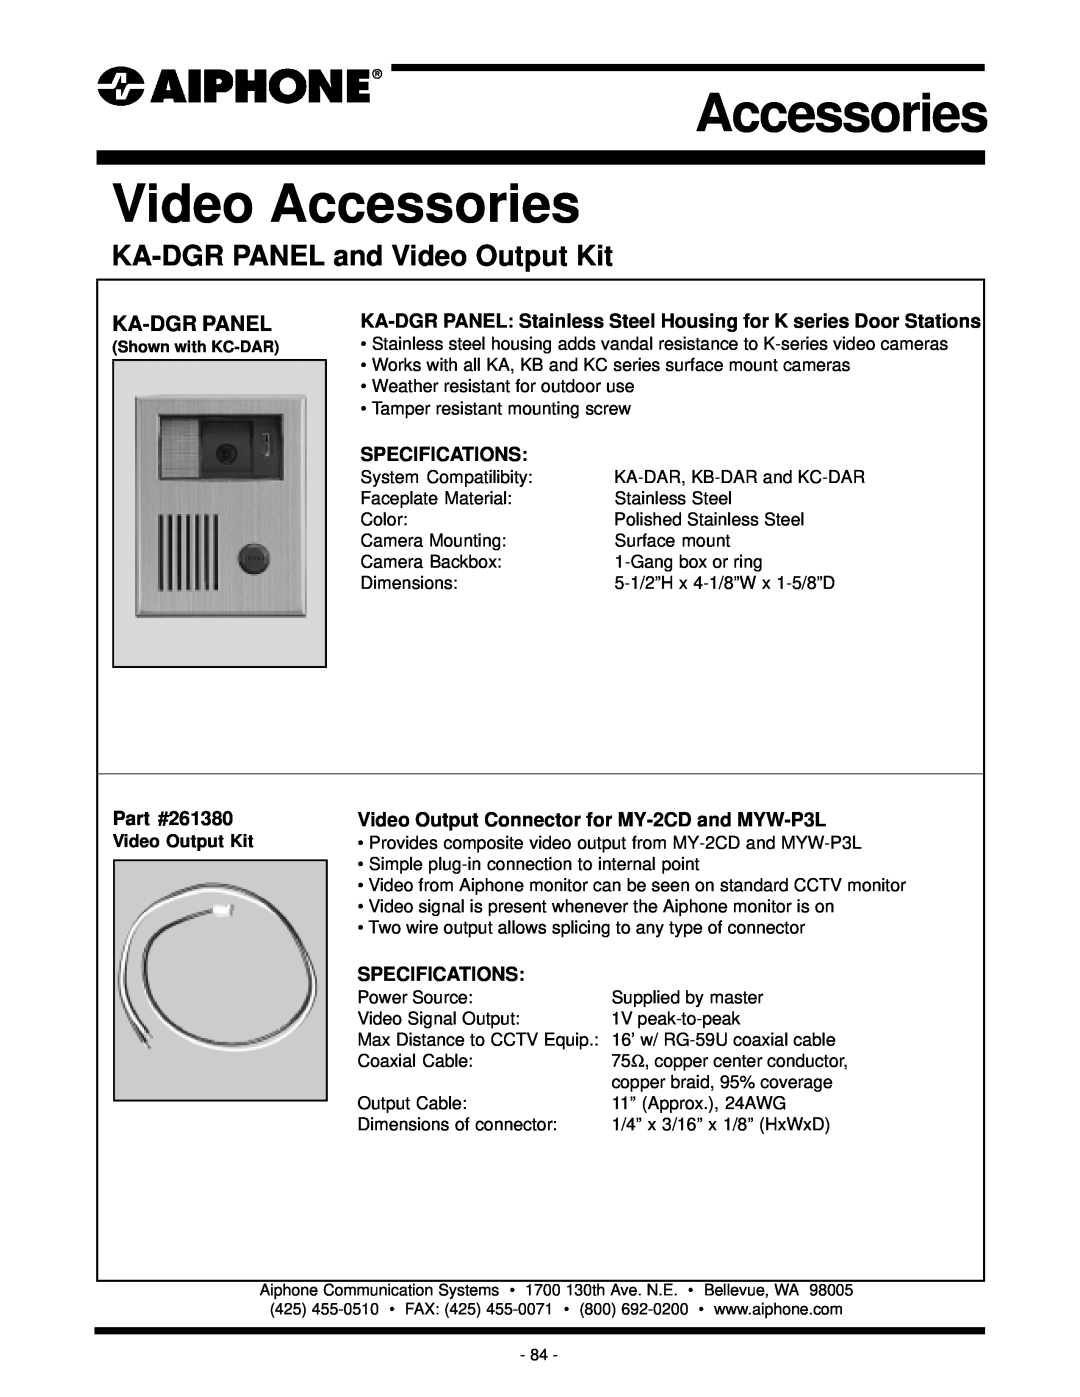 Aiphone specifications Accessories Video Accessories, KA-DGRPANEL and Video Output Kit, Ka-Dgrpanel, Specifications 